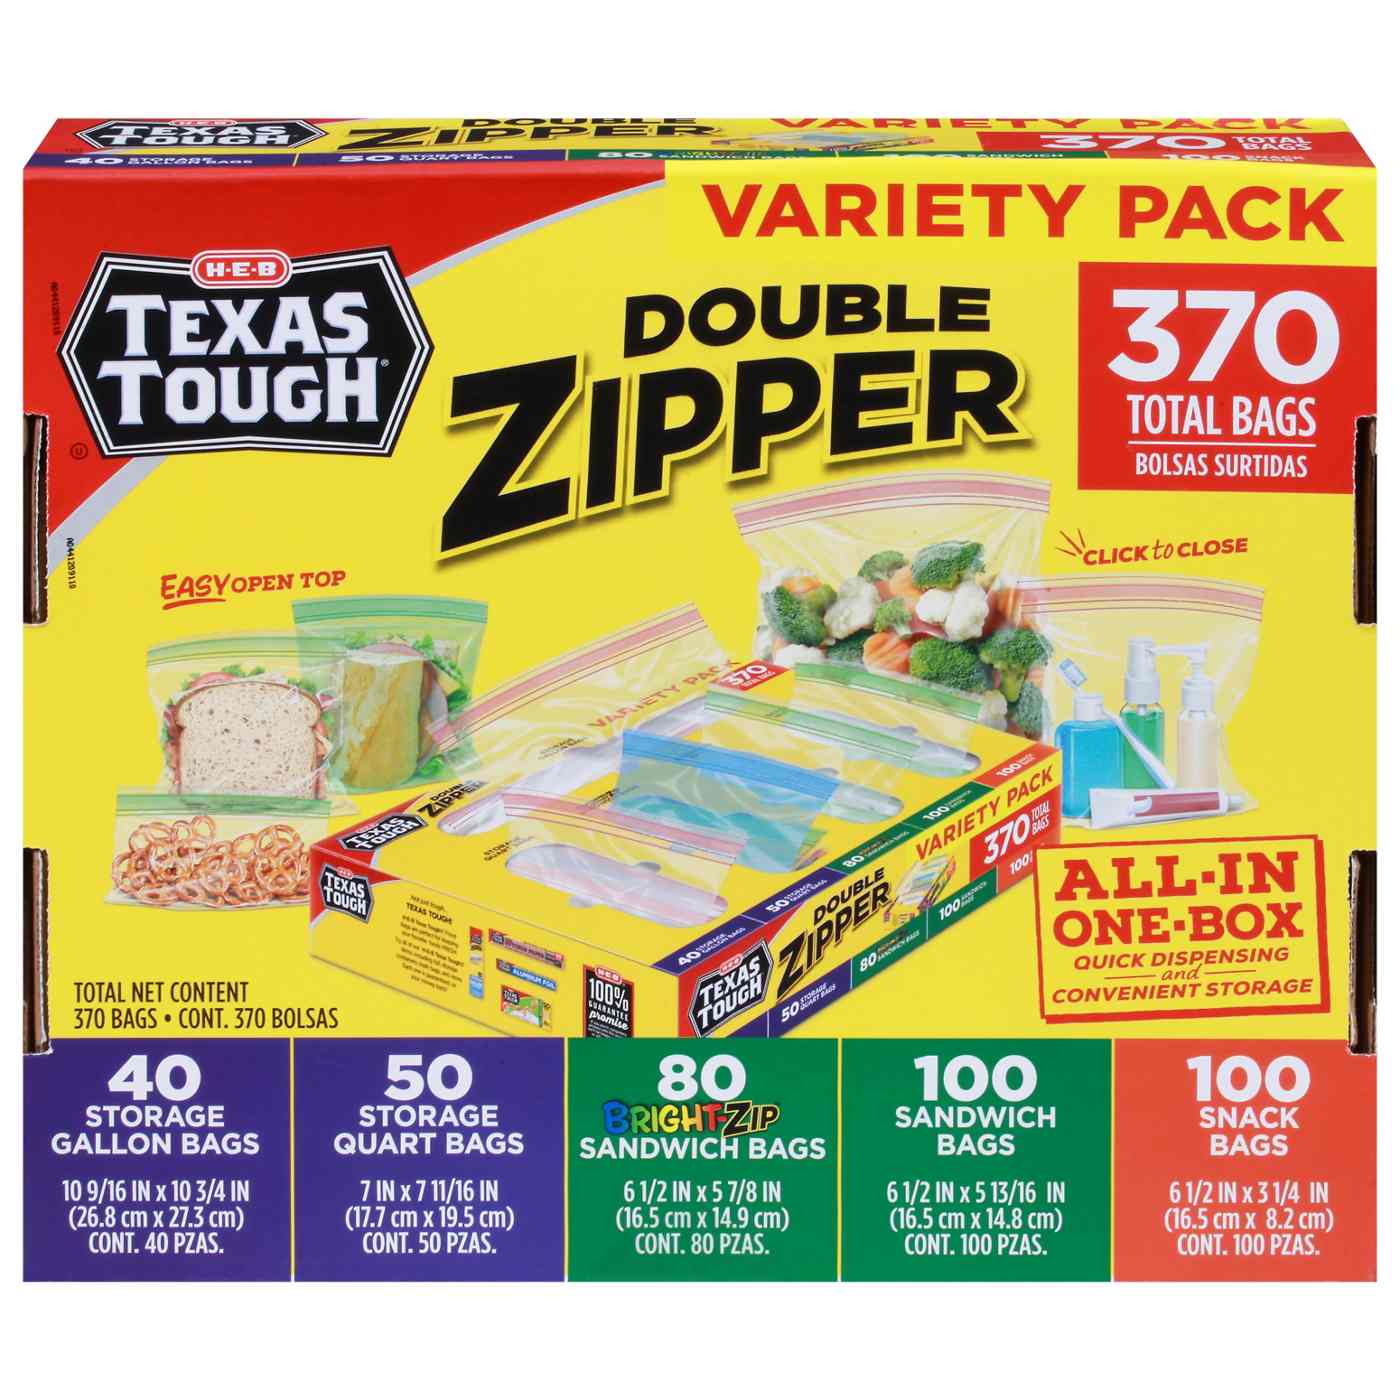 H-E-B Texas Tough Double Zipper Storage Bags - Variety Pack; image 1 of 3